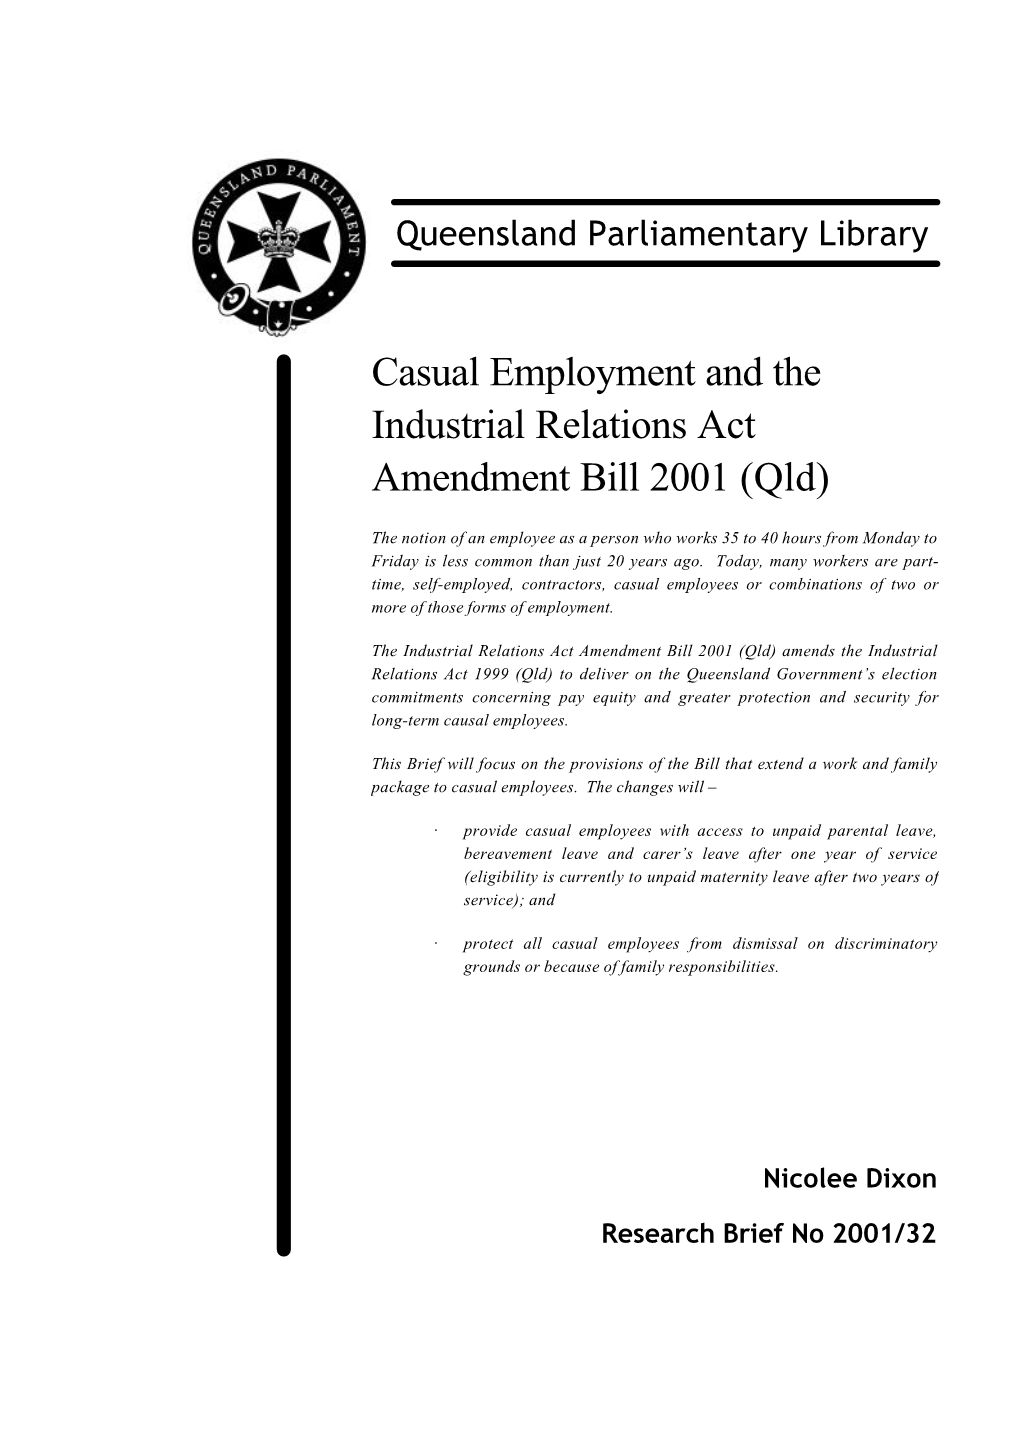 Casual Employment and the Industrial Relations Act Amendment Bill 2001 (Qld)